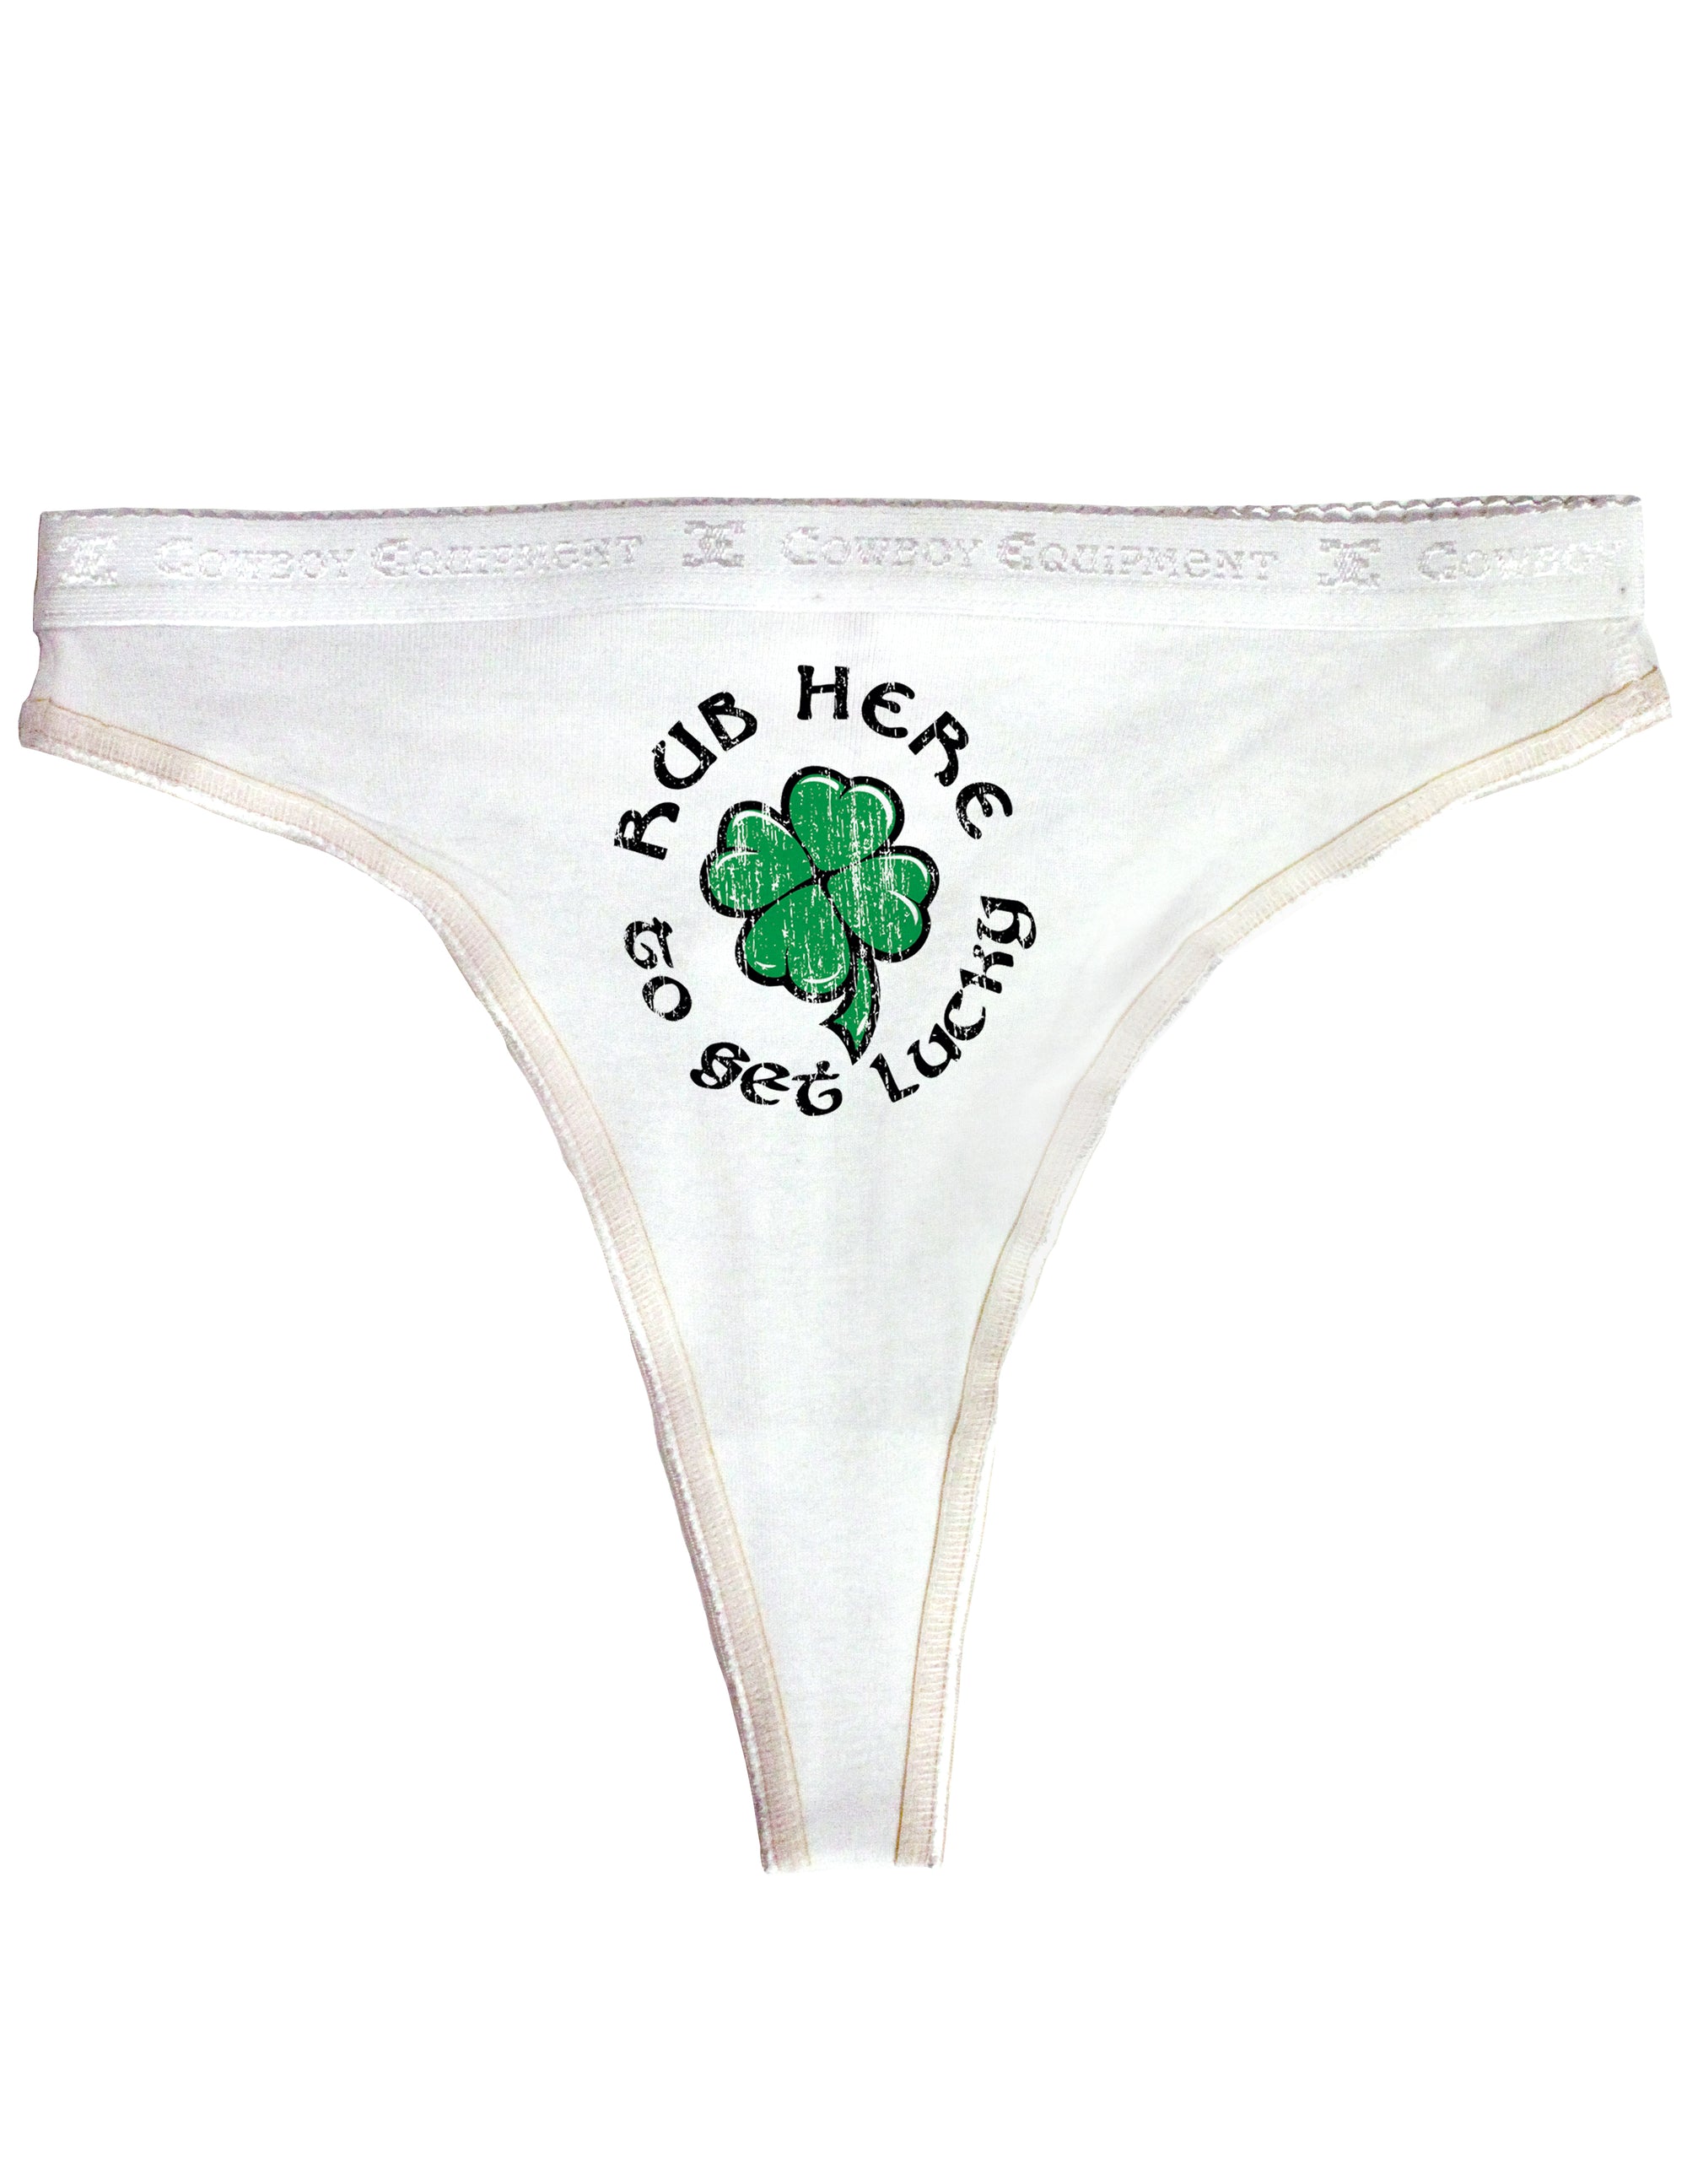 Rub Here to Get Lucky - Womens Thong Panties Underwear